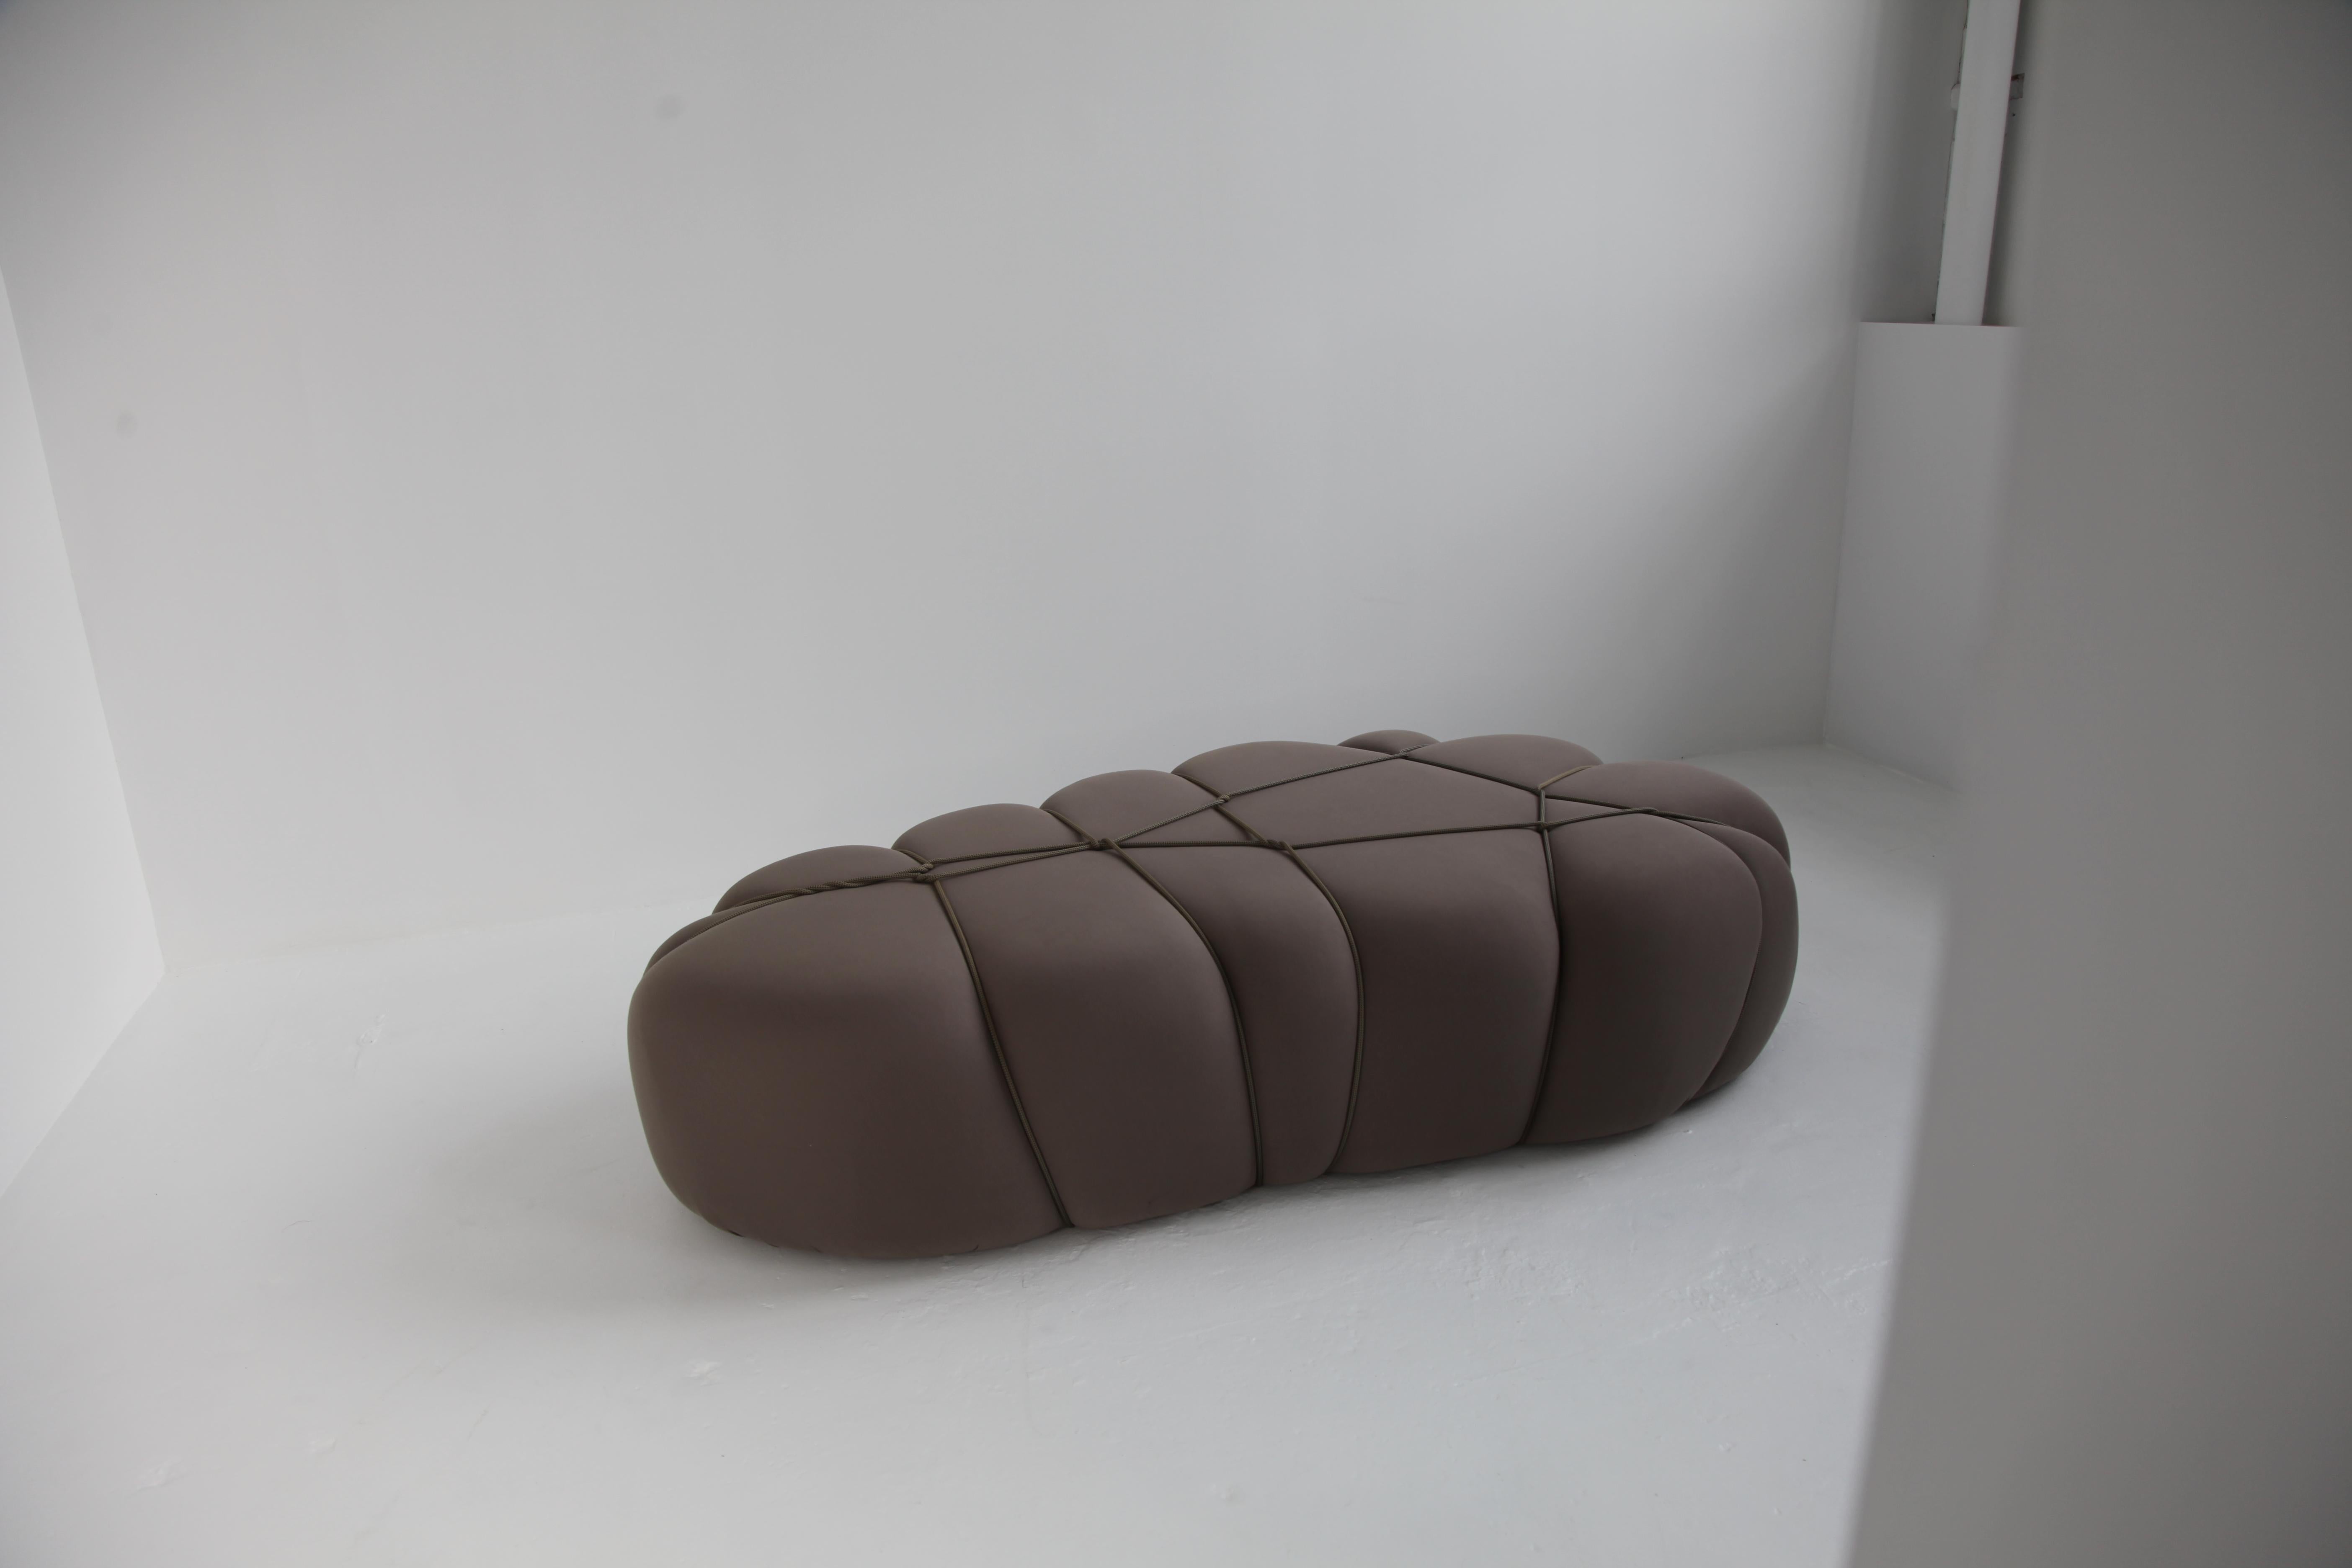 The poufs are a form of modular furniture designed for both relaxation and seating. They are constructed from soft foam covered with a thick, elastic fabric that conceals any visible seams. Drawing inspiration from the intricate art of Shibari, a